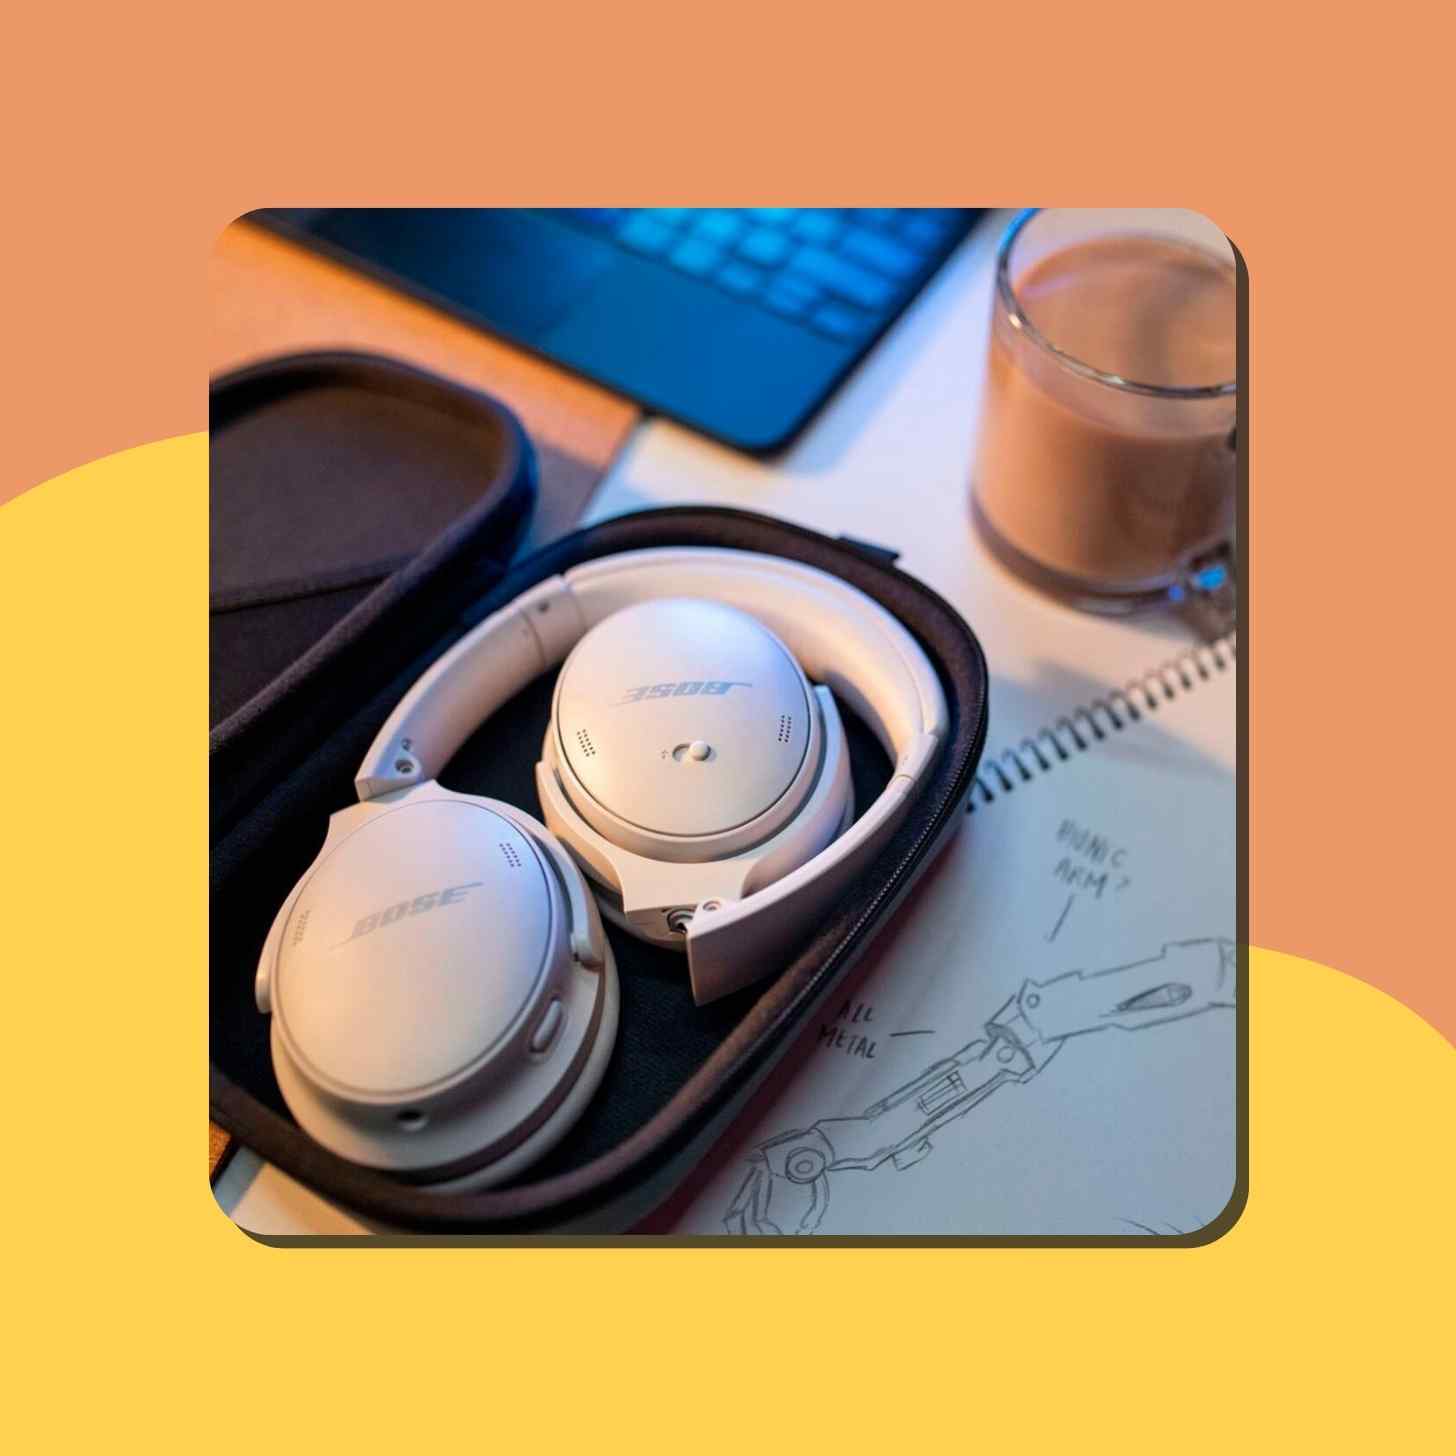 A Pair Of Bose QuietComfort Headphones Sitting In A Case On A Table Next To A Cup Of Coffee